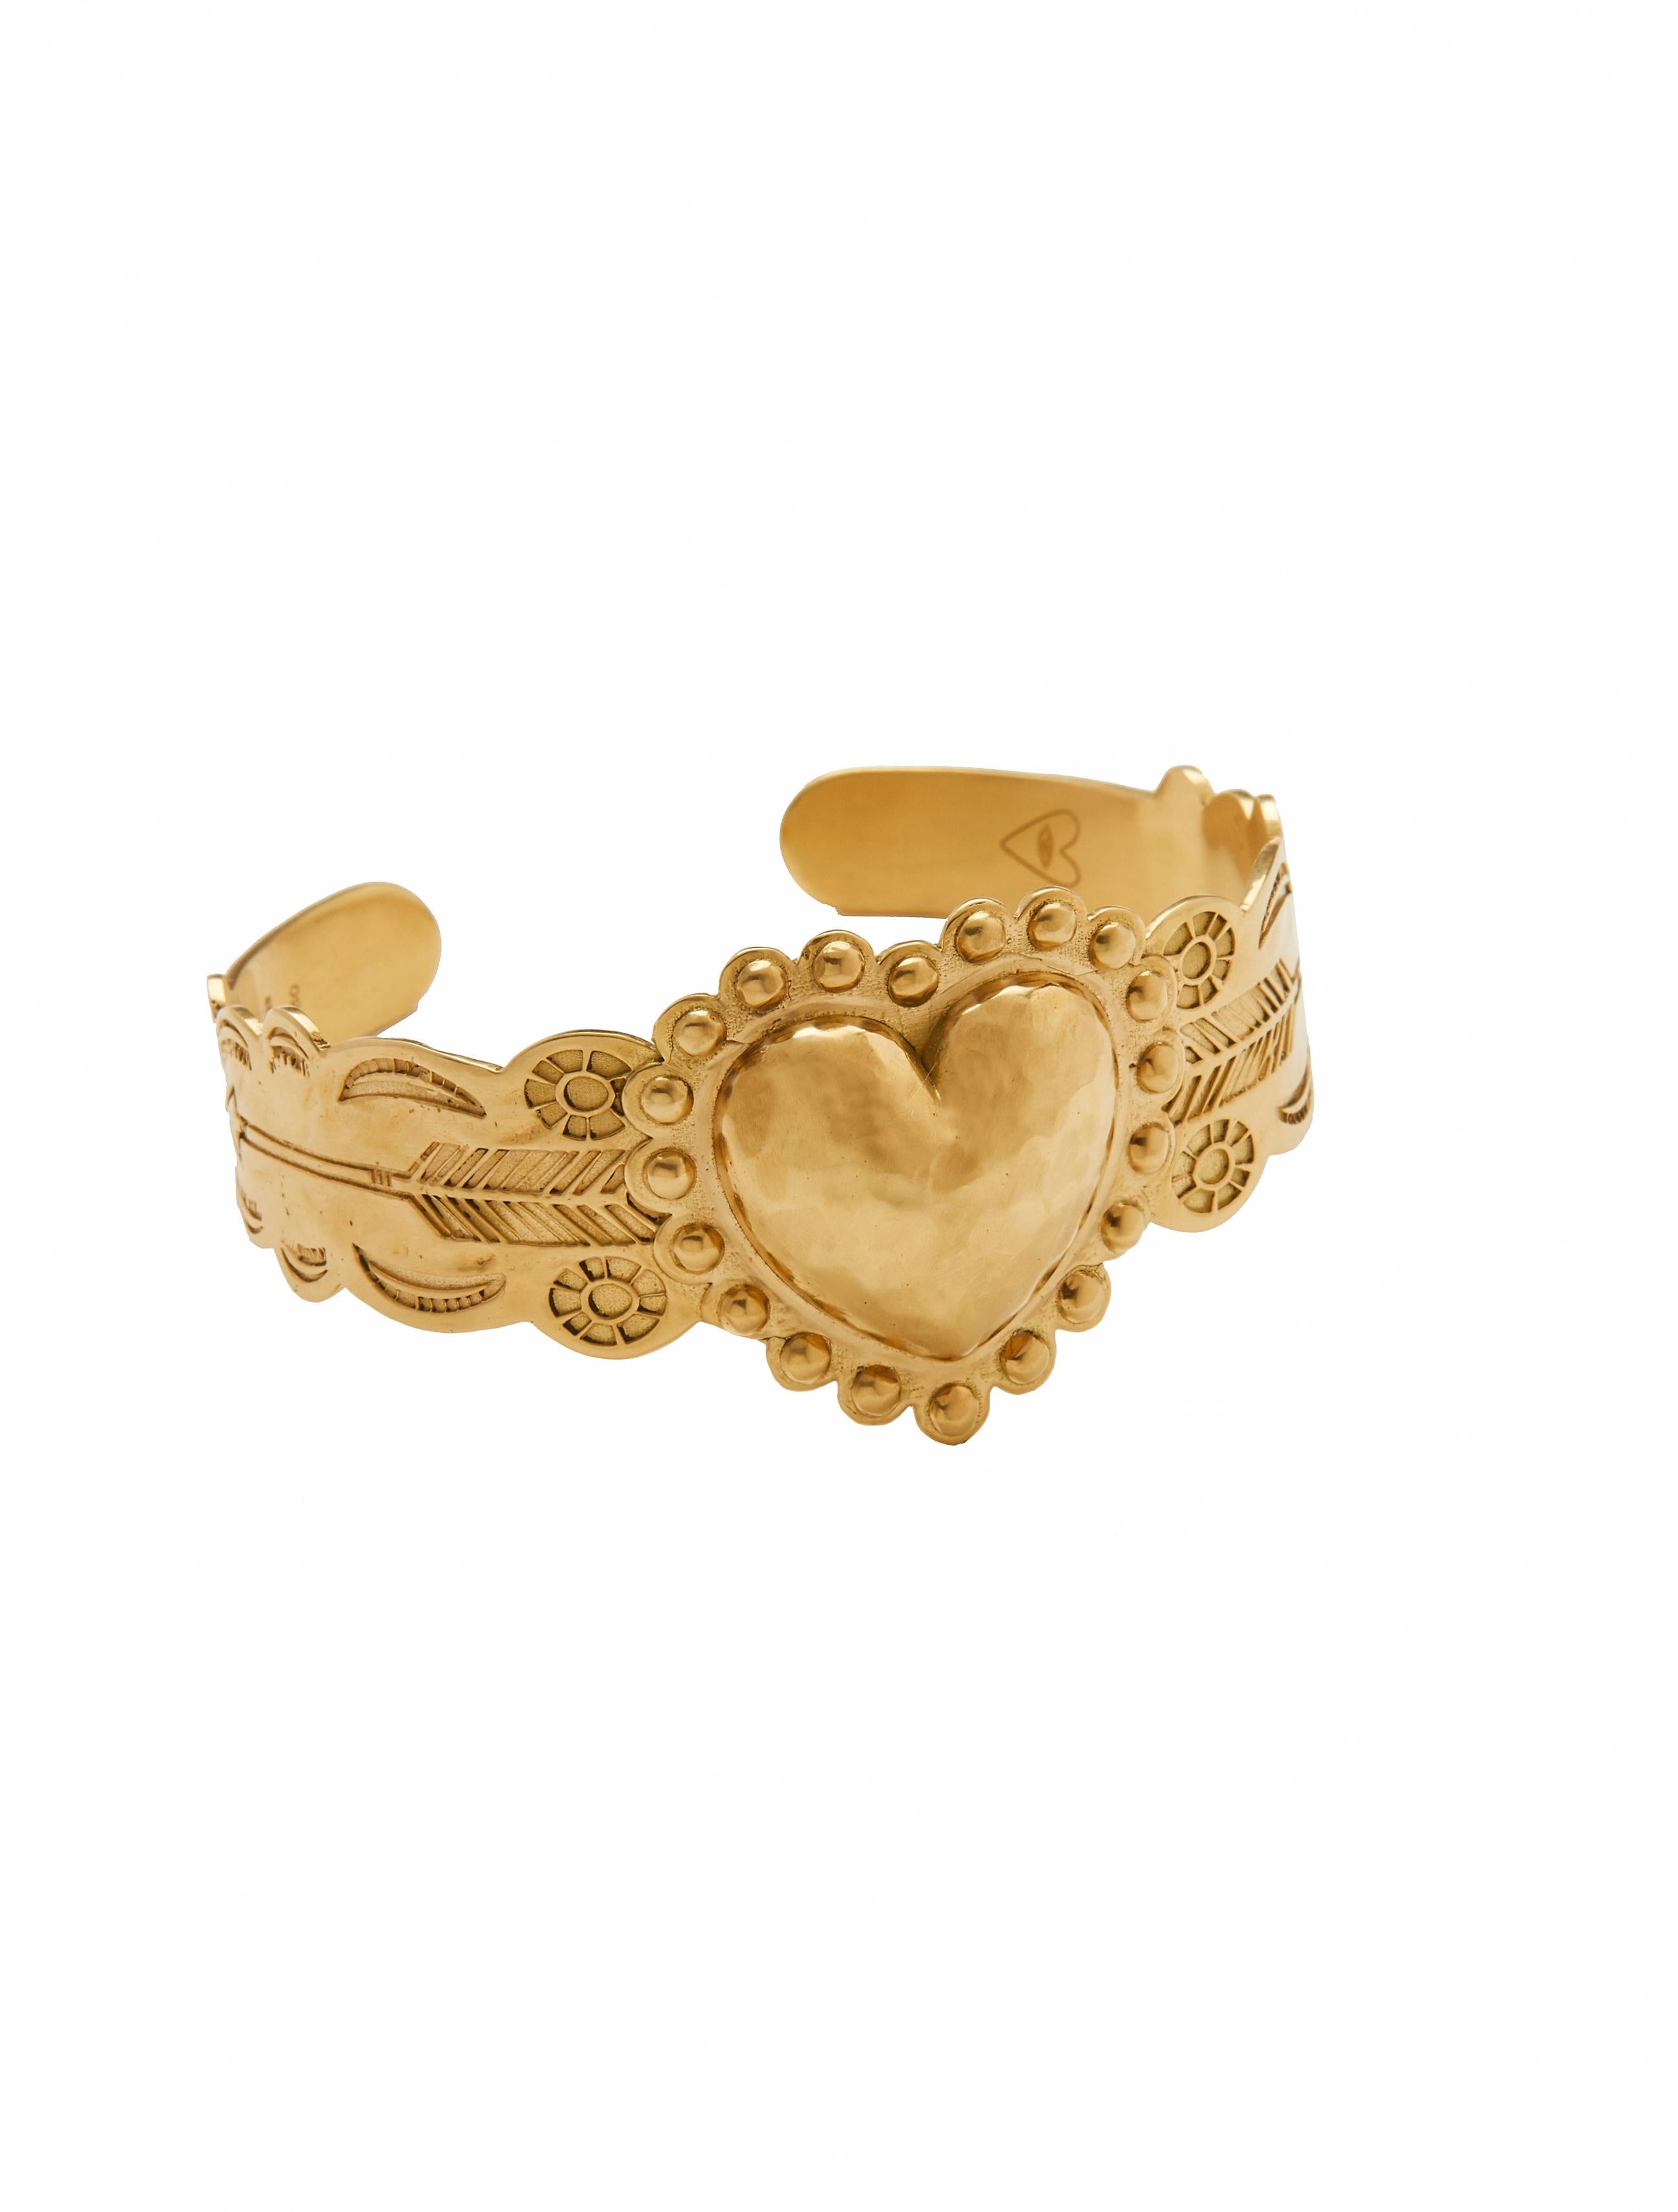 Heart cuff bracelet designed by Christina Alexiou.
The heart cuff bracelet is crafted with 18k yellow gold handmade in Greece. As Christina Alexiou notes, she draws on jewellery's ancient purpose as 